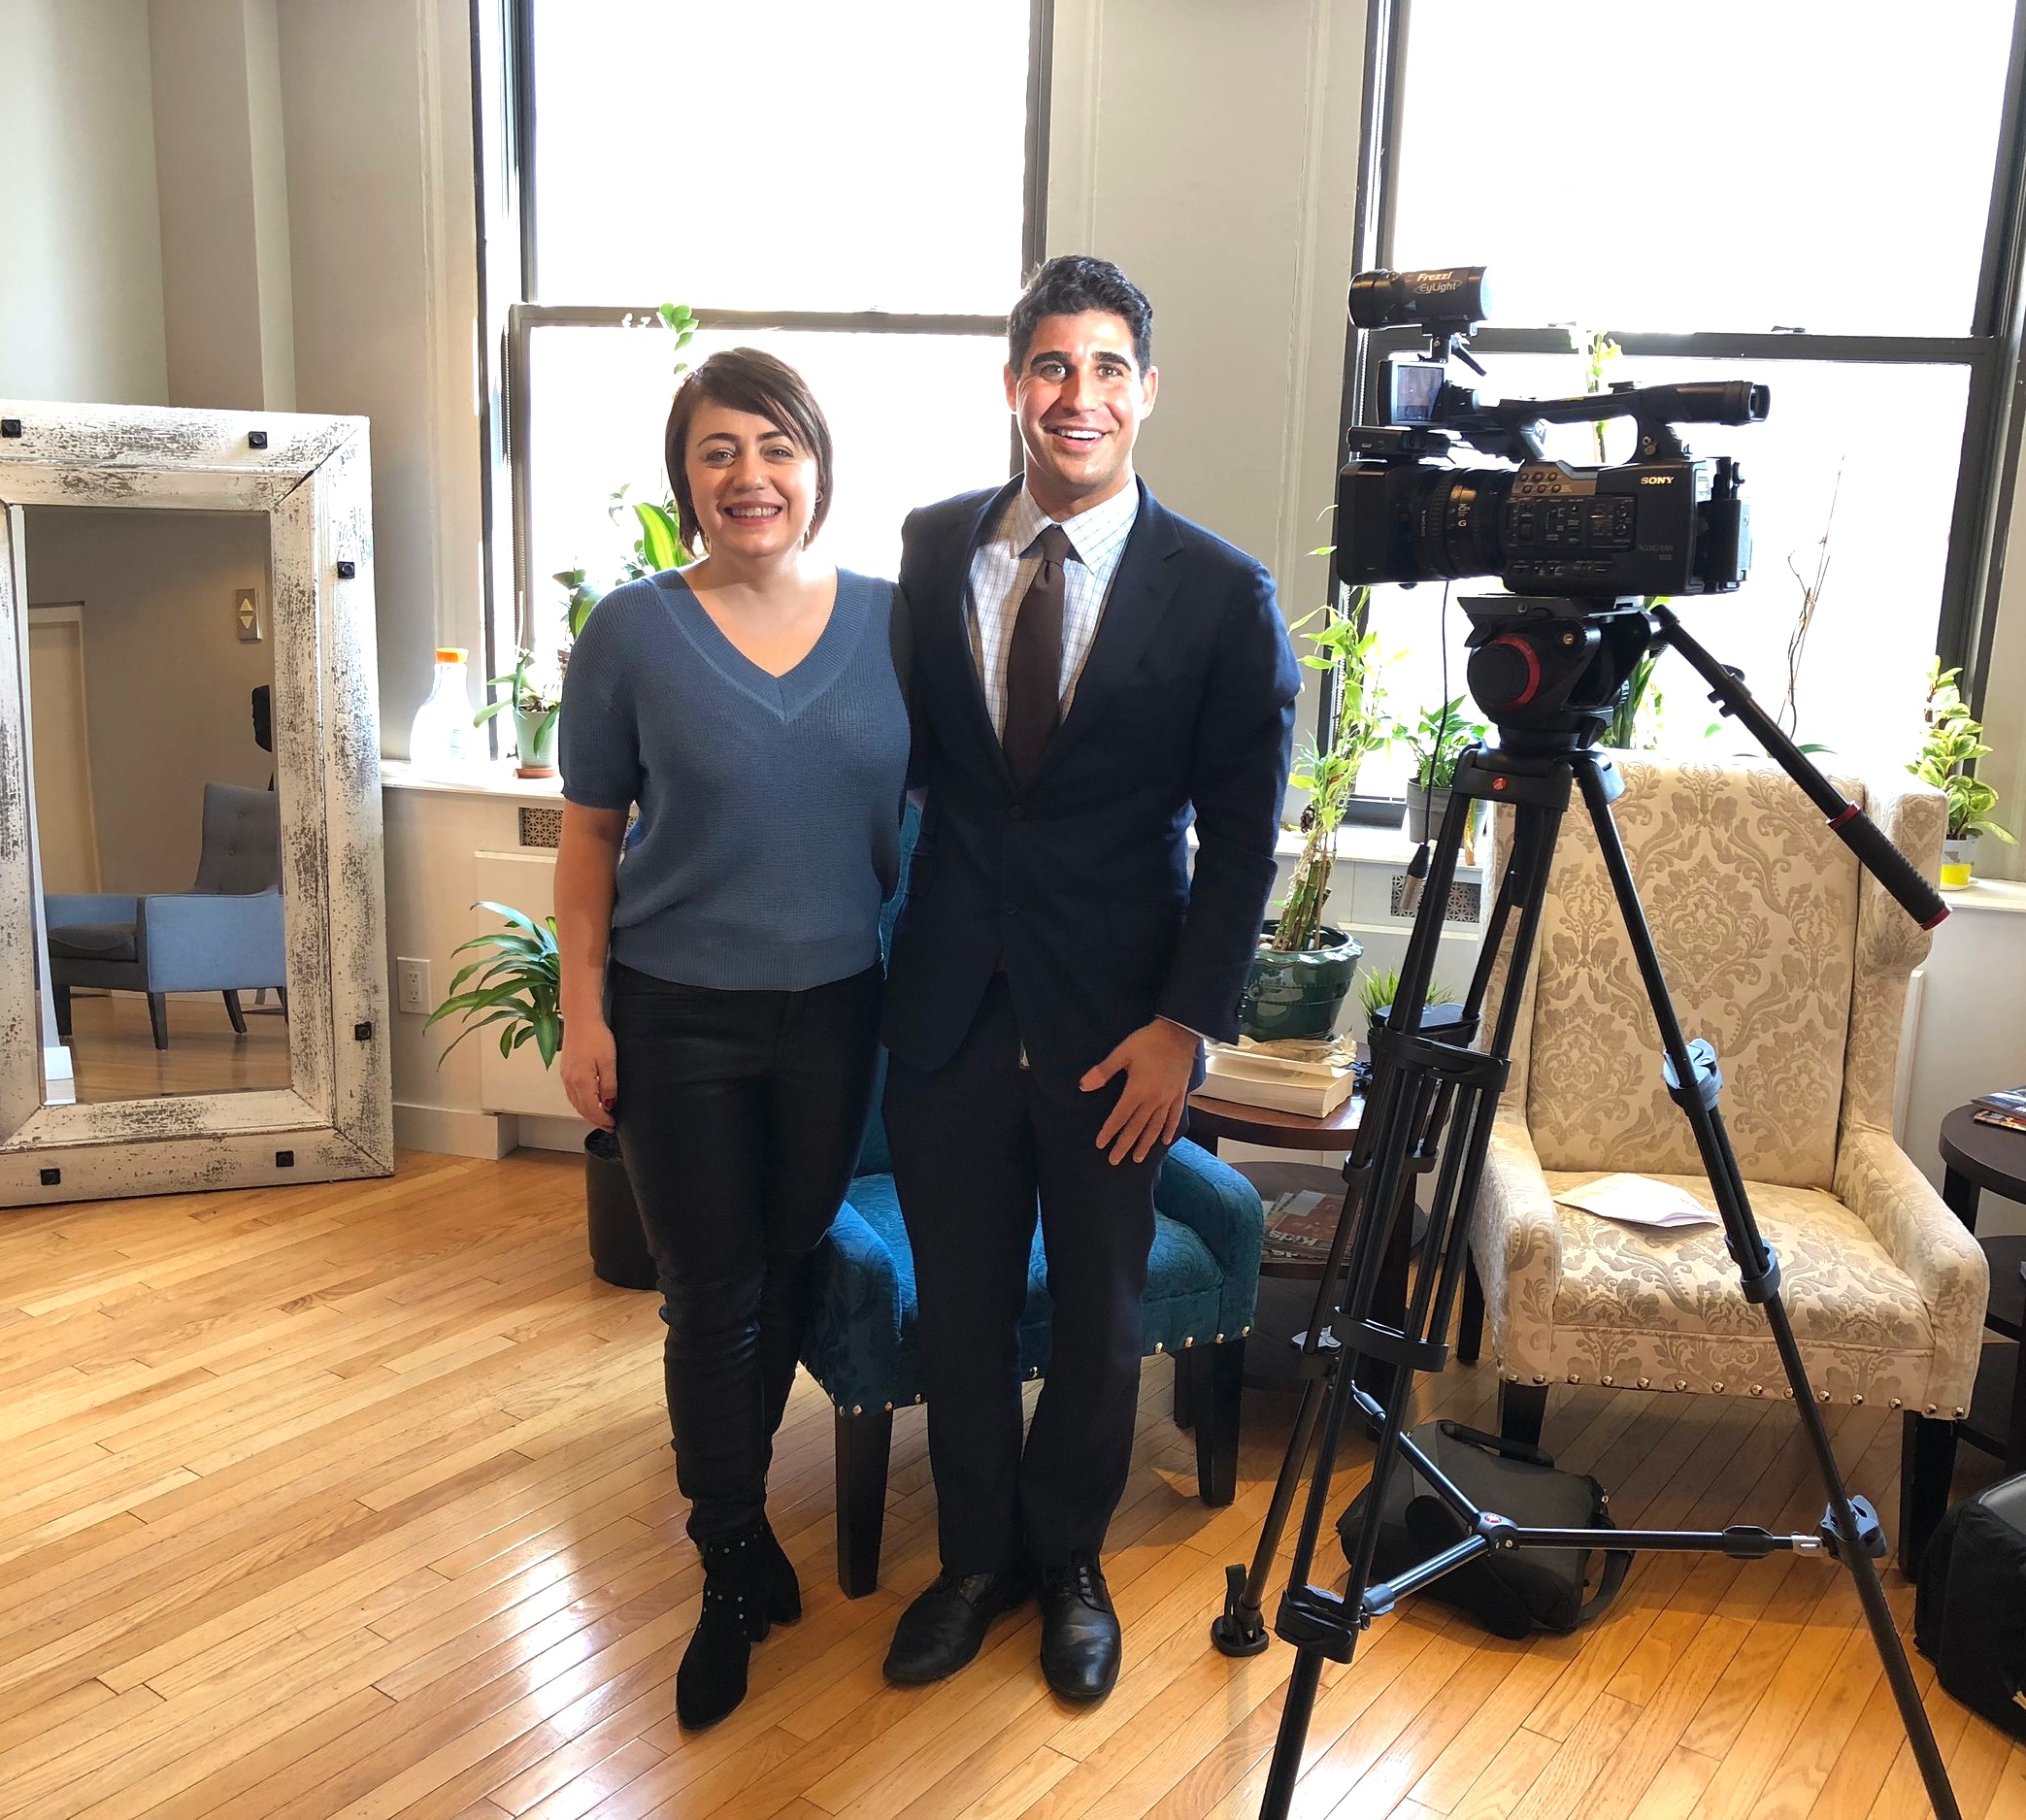 Irina Popa-Erwin of The NYC Life Coach on CBS NY Interview by Marc Liverman